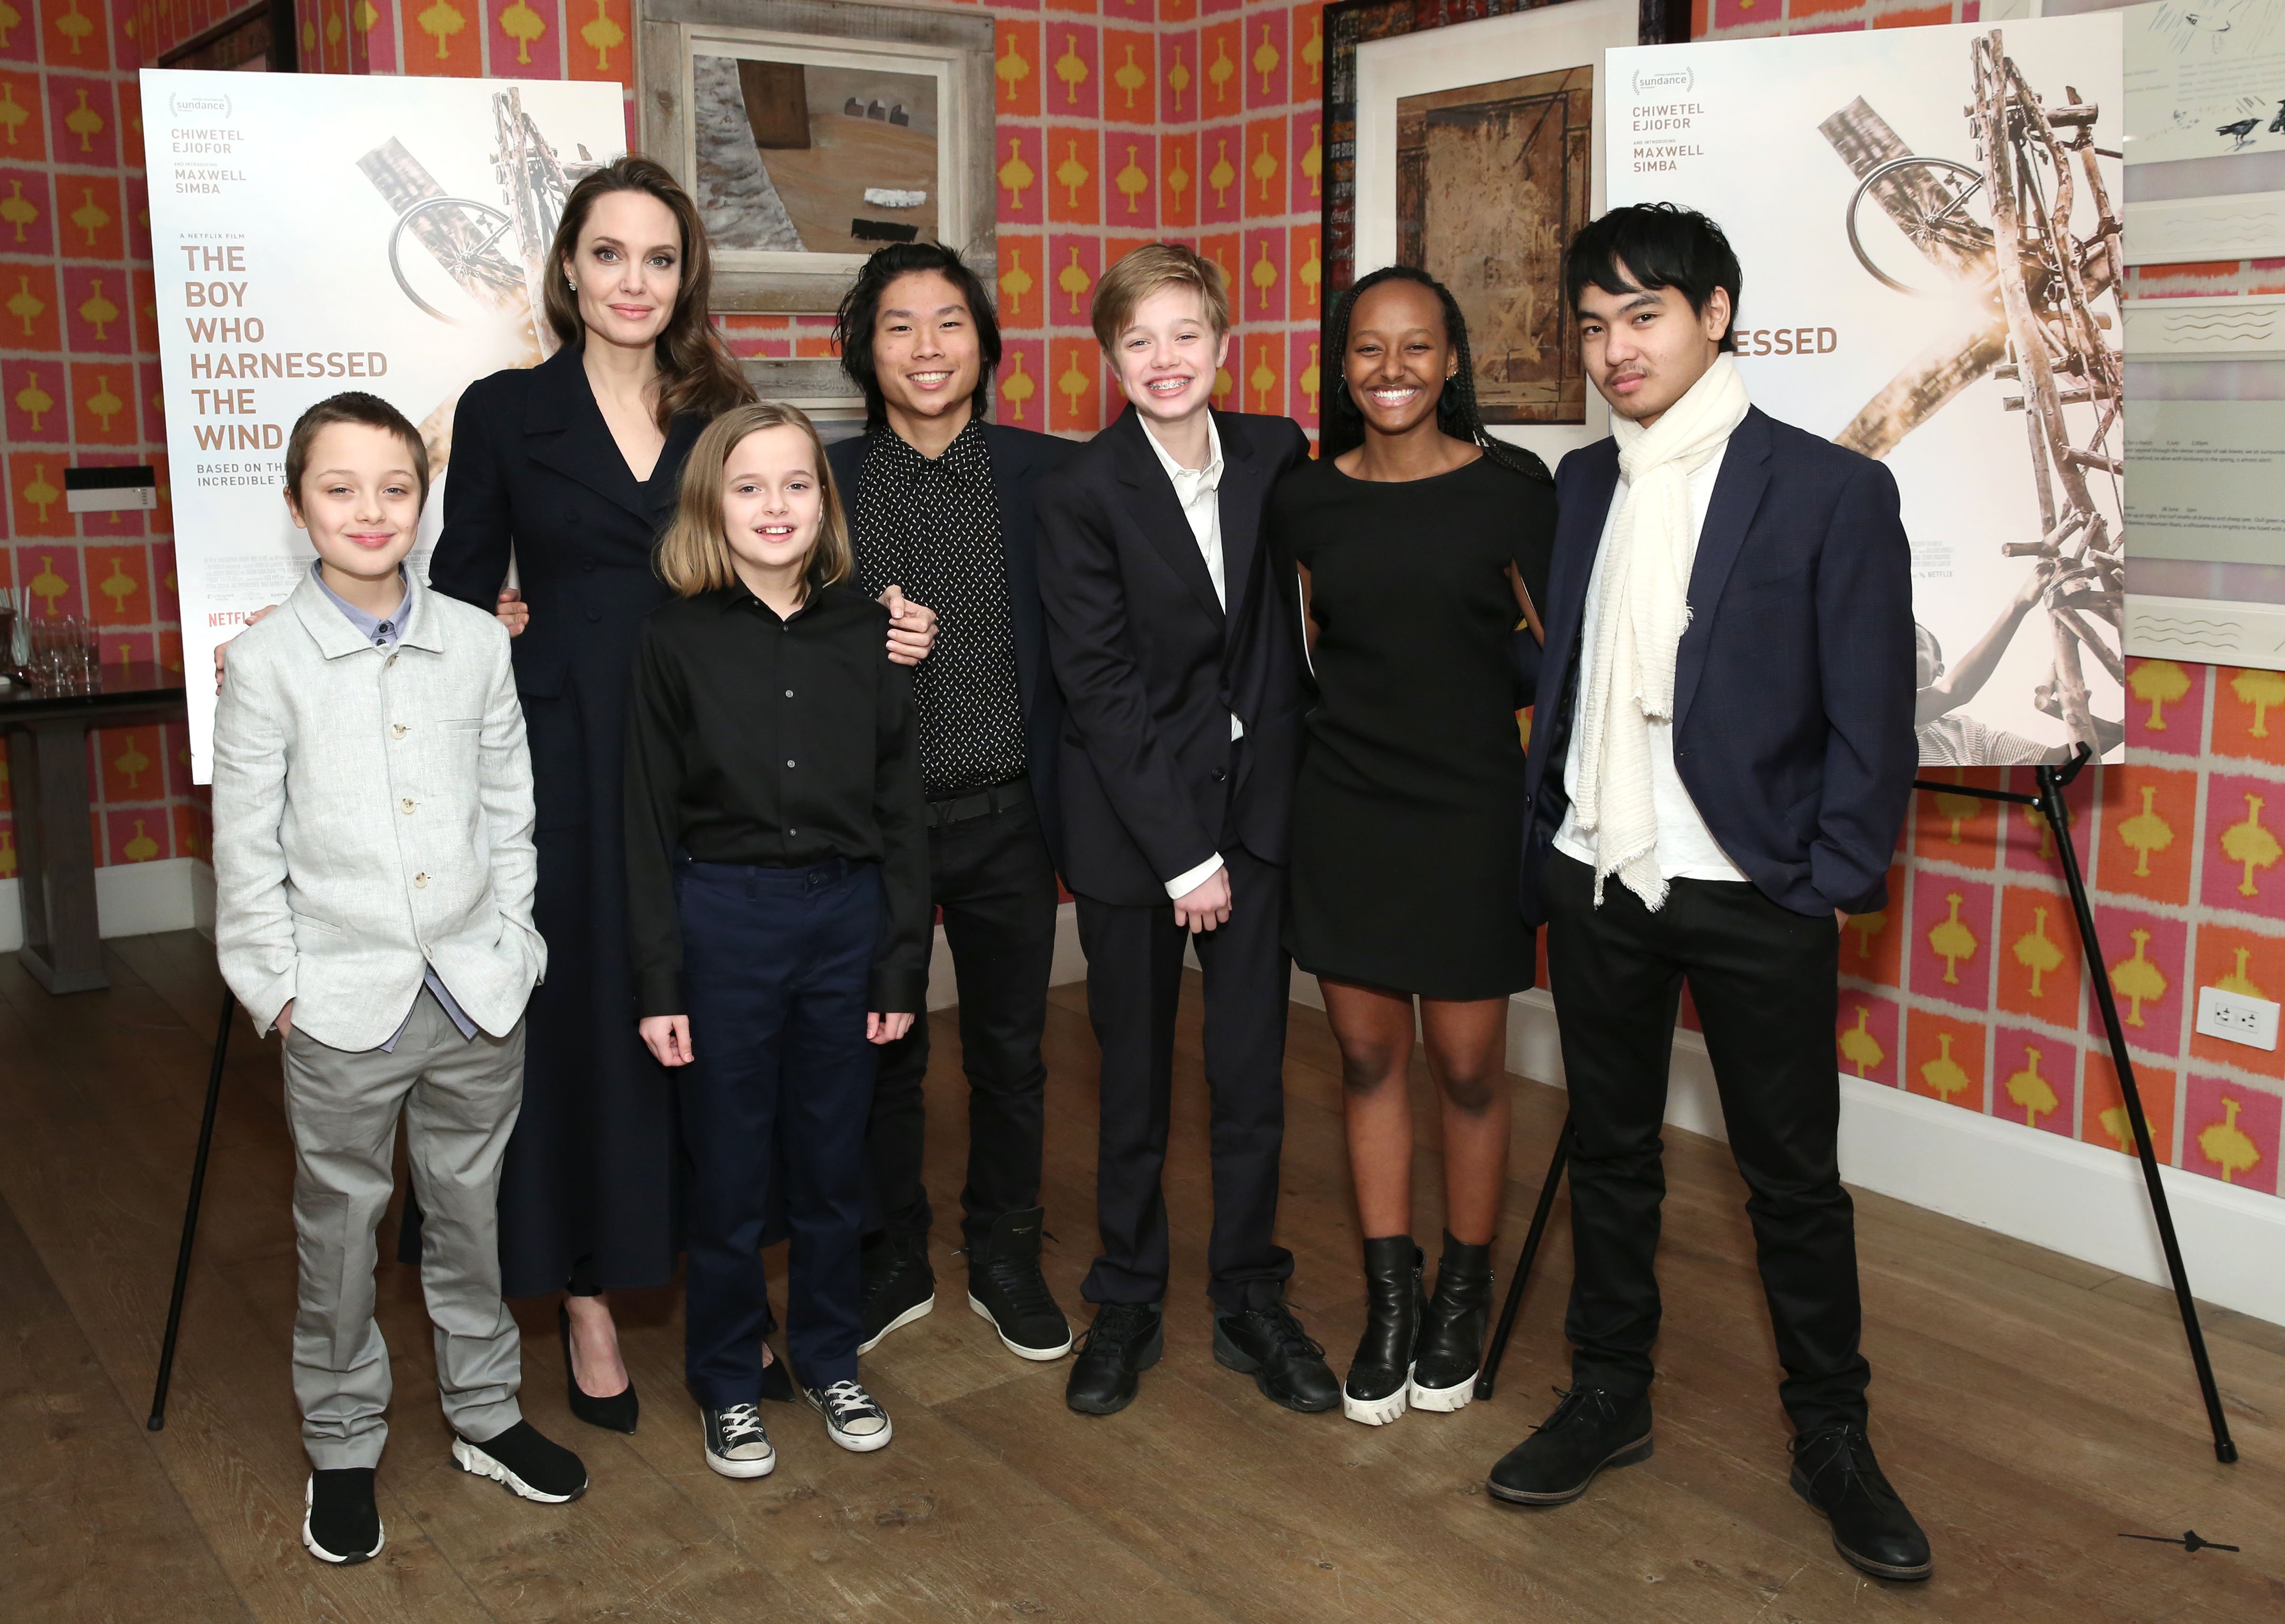 Angelina Jolie with children Knox Jolie-Pitt, Vivienne Jolie-Pitt, Pax Jolie-Pitt, Shiloh Jolie-Pitt, Zahara Jolie-Pitt and Maddox Jolie-Pitt attend "The Boy Who Harnessed The Wind" Special Screening at Crosby Street Hotel on February 25, 2019 in New York City  ┃Source: Getty Images